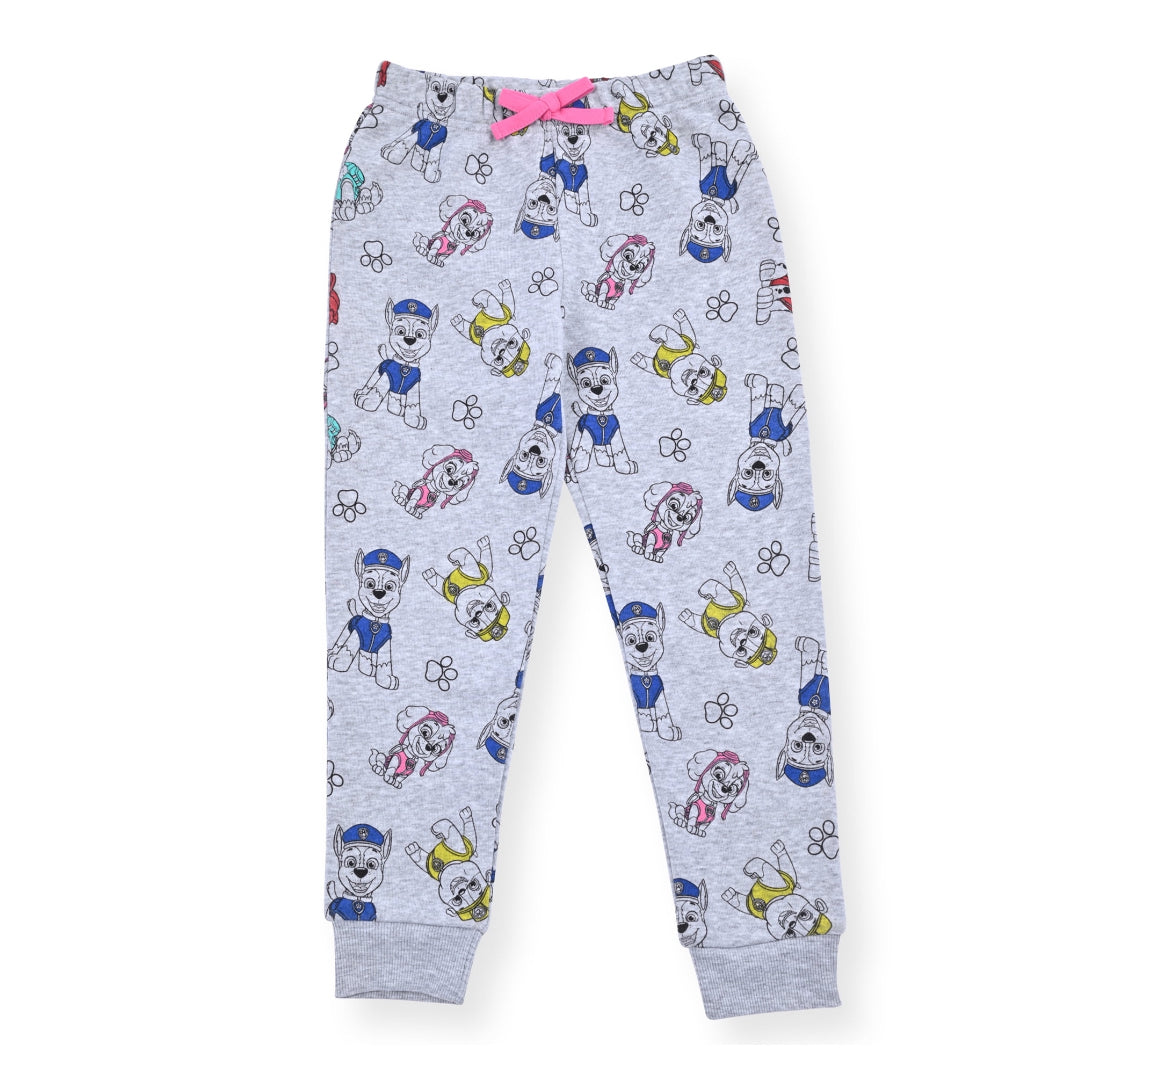 Paw Patrol Baby Girl Jogger Pant and Crew Neck, 2 Piece Outfit Set